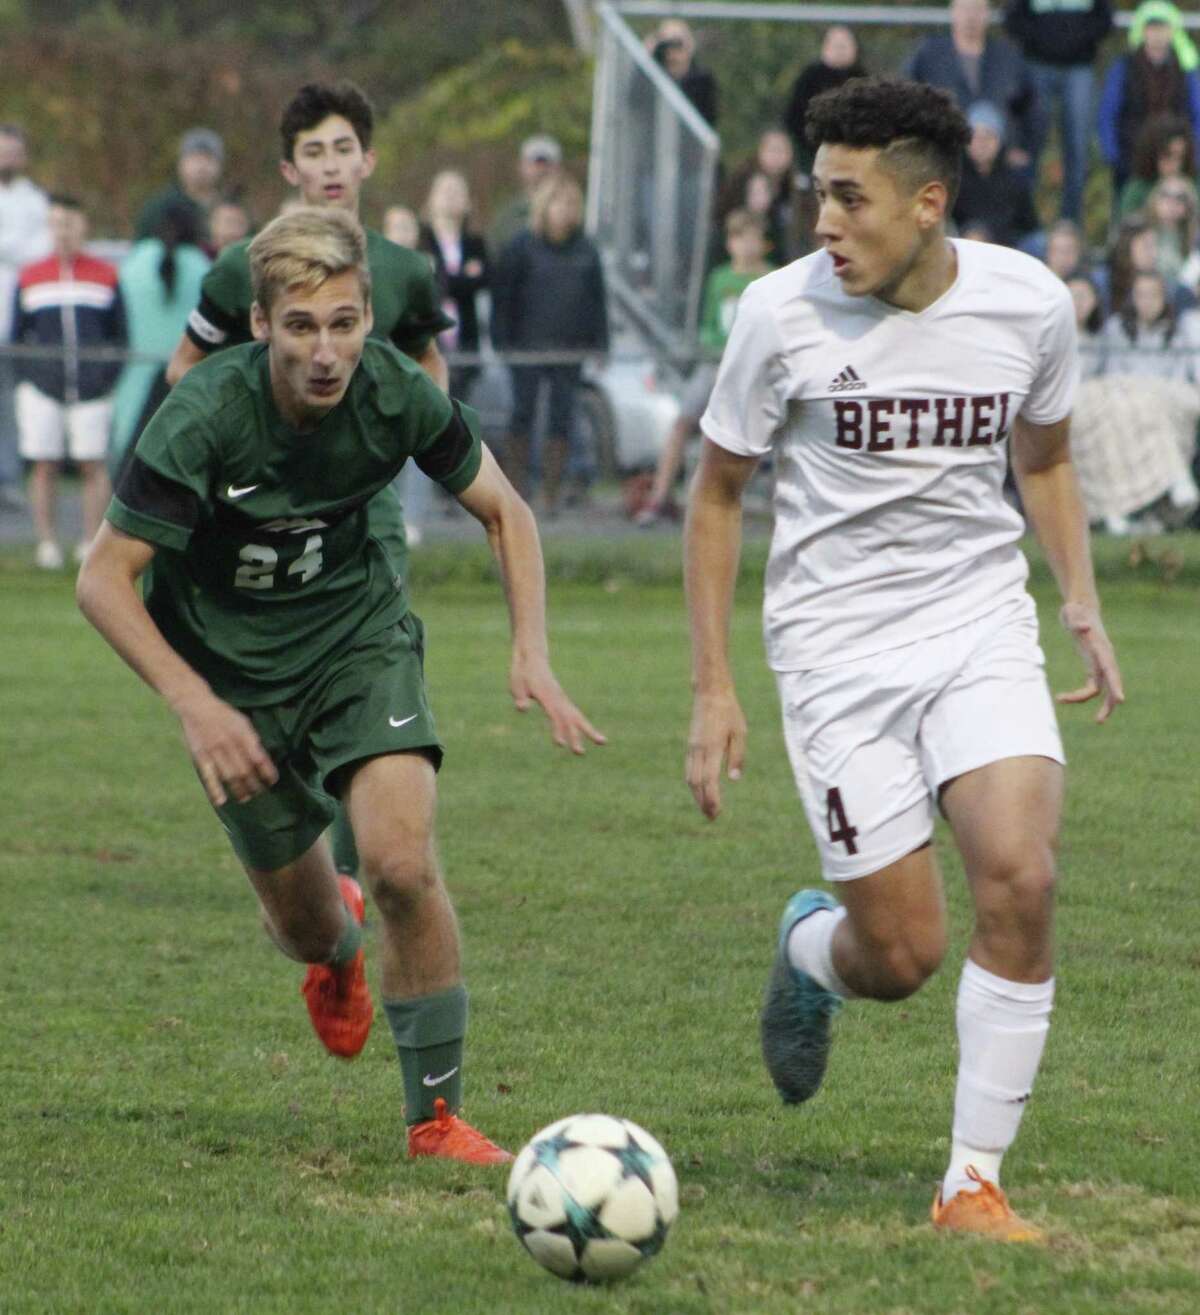 Bethel’s Gabriel Carrijo, right, looks for an opening as New Milford’s Chase Schuster defends during the South-West Conference quarterfinal boys soccer game at Rourke Field in Bethel on Oct. 27.